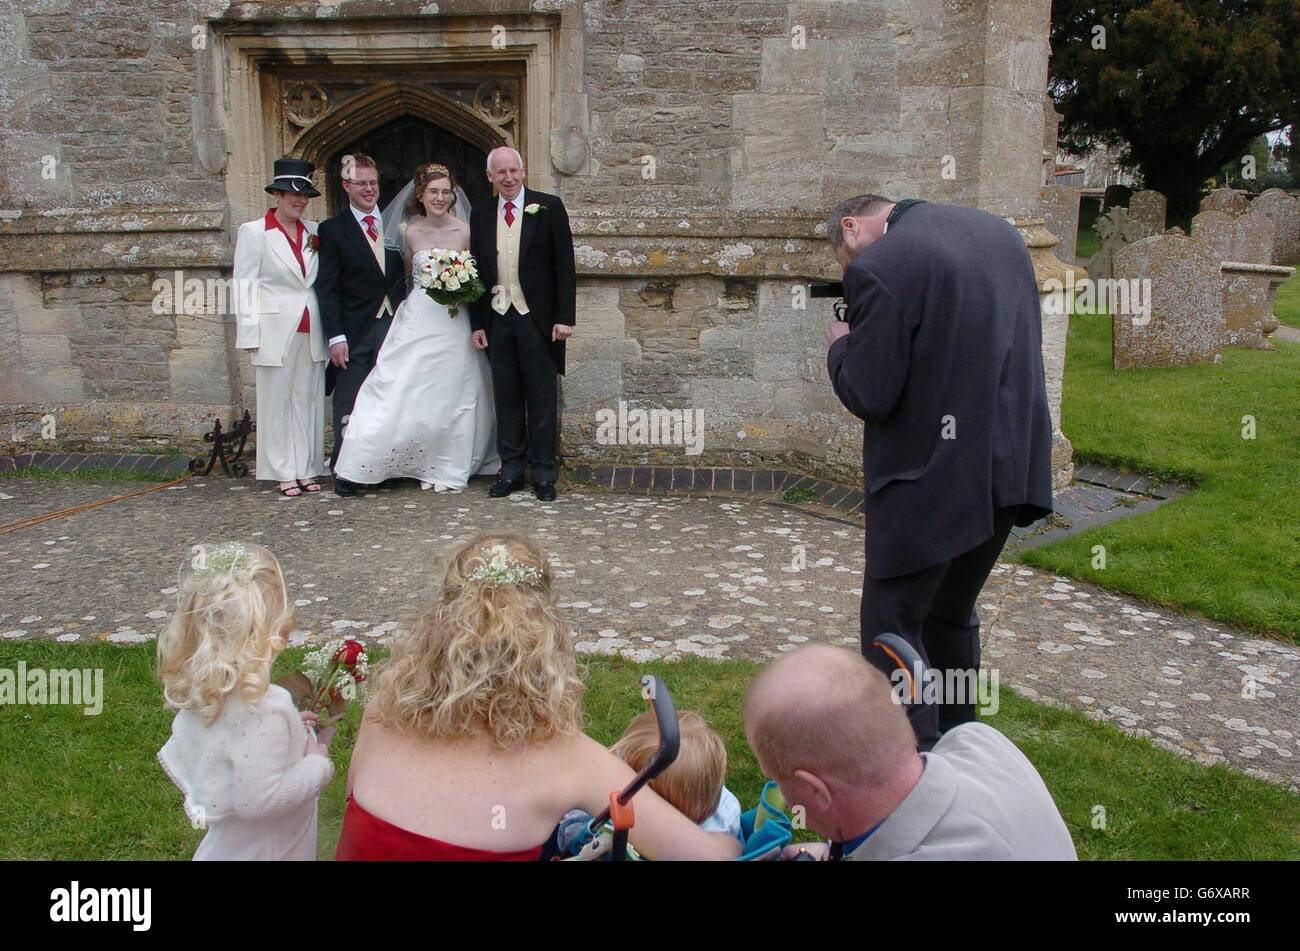 A photographer takes a wedding photograph of happy couple Matthew and Rebekah Jones after they had been married at St Mary Magdalene Chuch in South Marston, near Swindon in Wiltshire, Saturday April 3, 2004. Matthew has now become the 11th generation in his family to marry in the same church as part of a tradition stretching back to 1690. Matthew, 28, had to seek special permission to continue this tradition, now that he lives in Rugby, in order to marry his bride, Rebekah, who hails from Devon. PA Photo : Johnny Green. Stock Photo